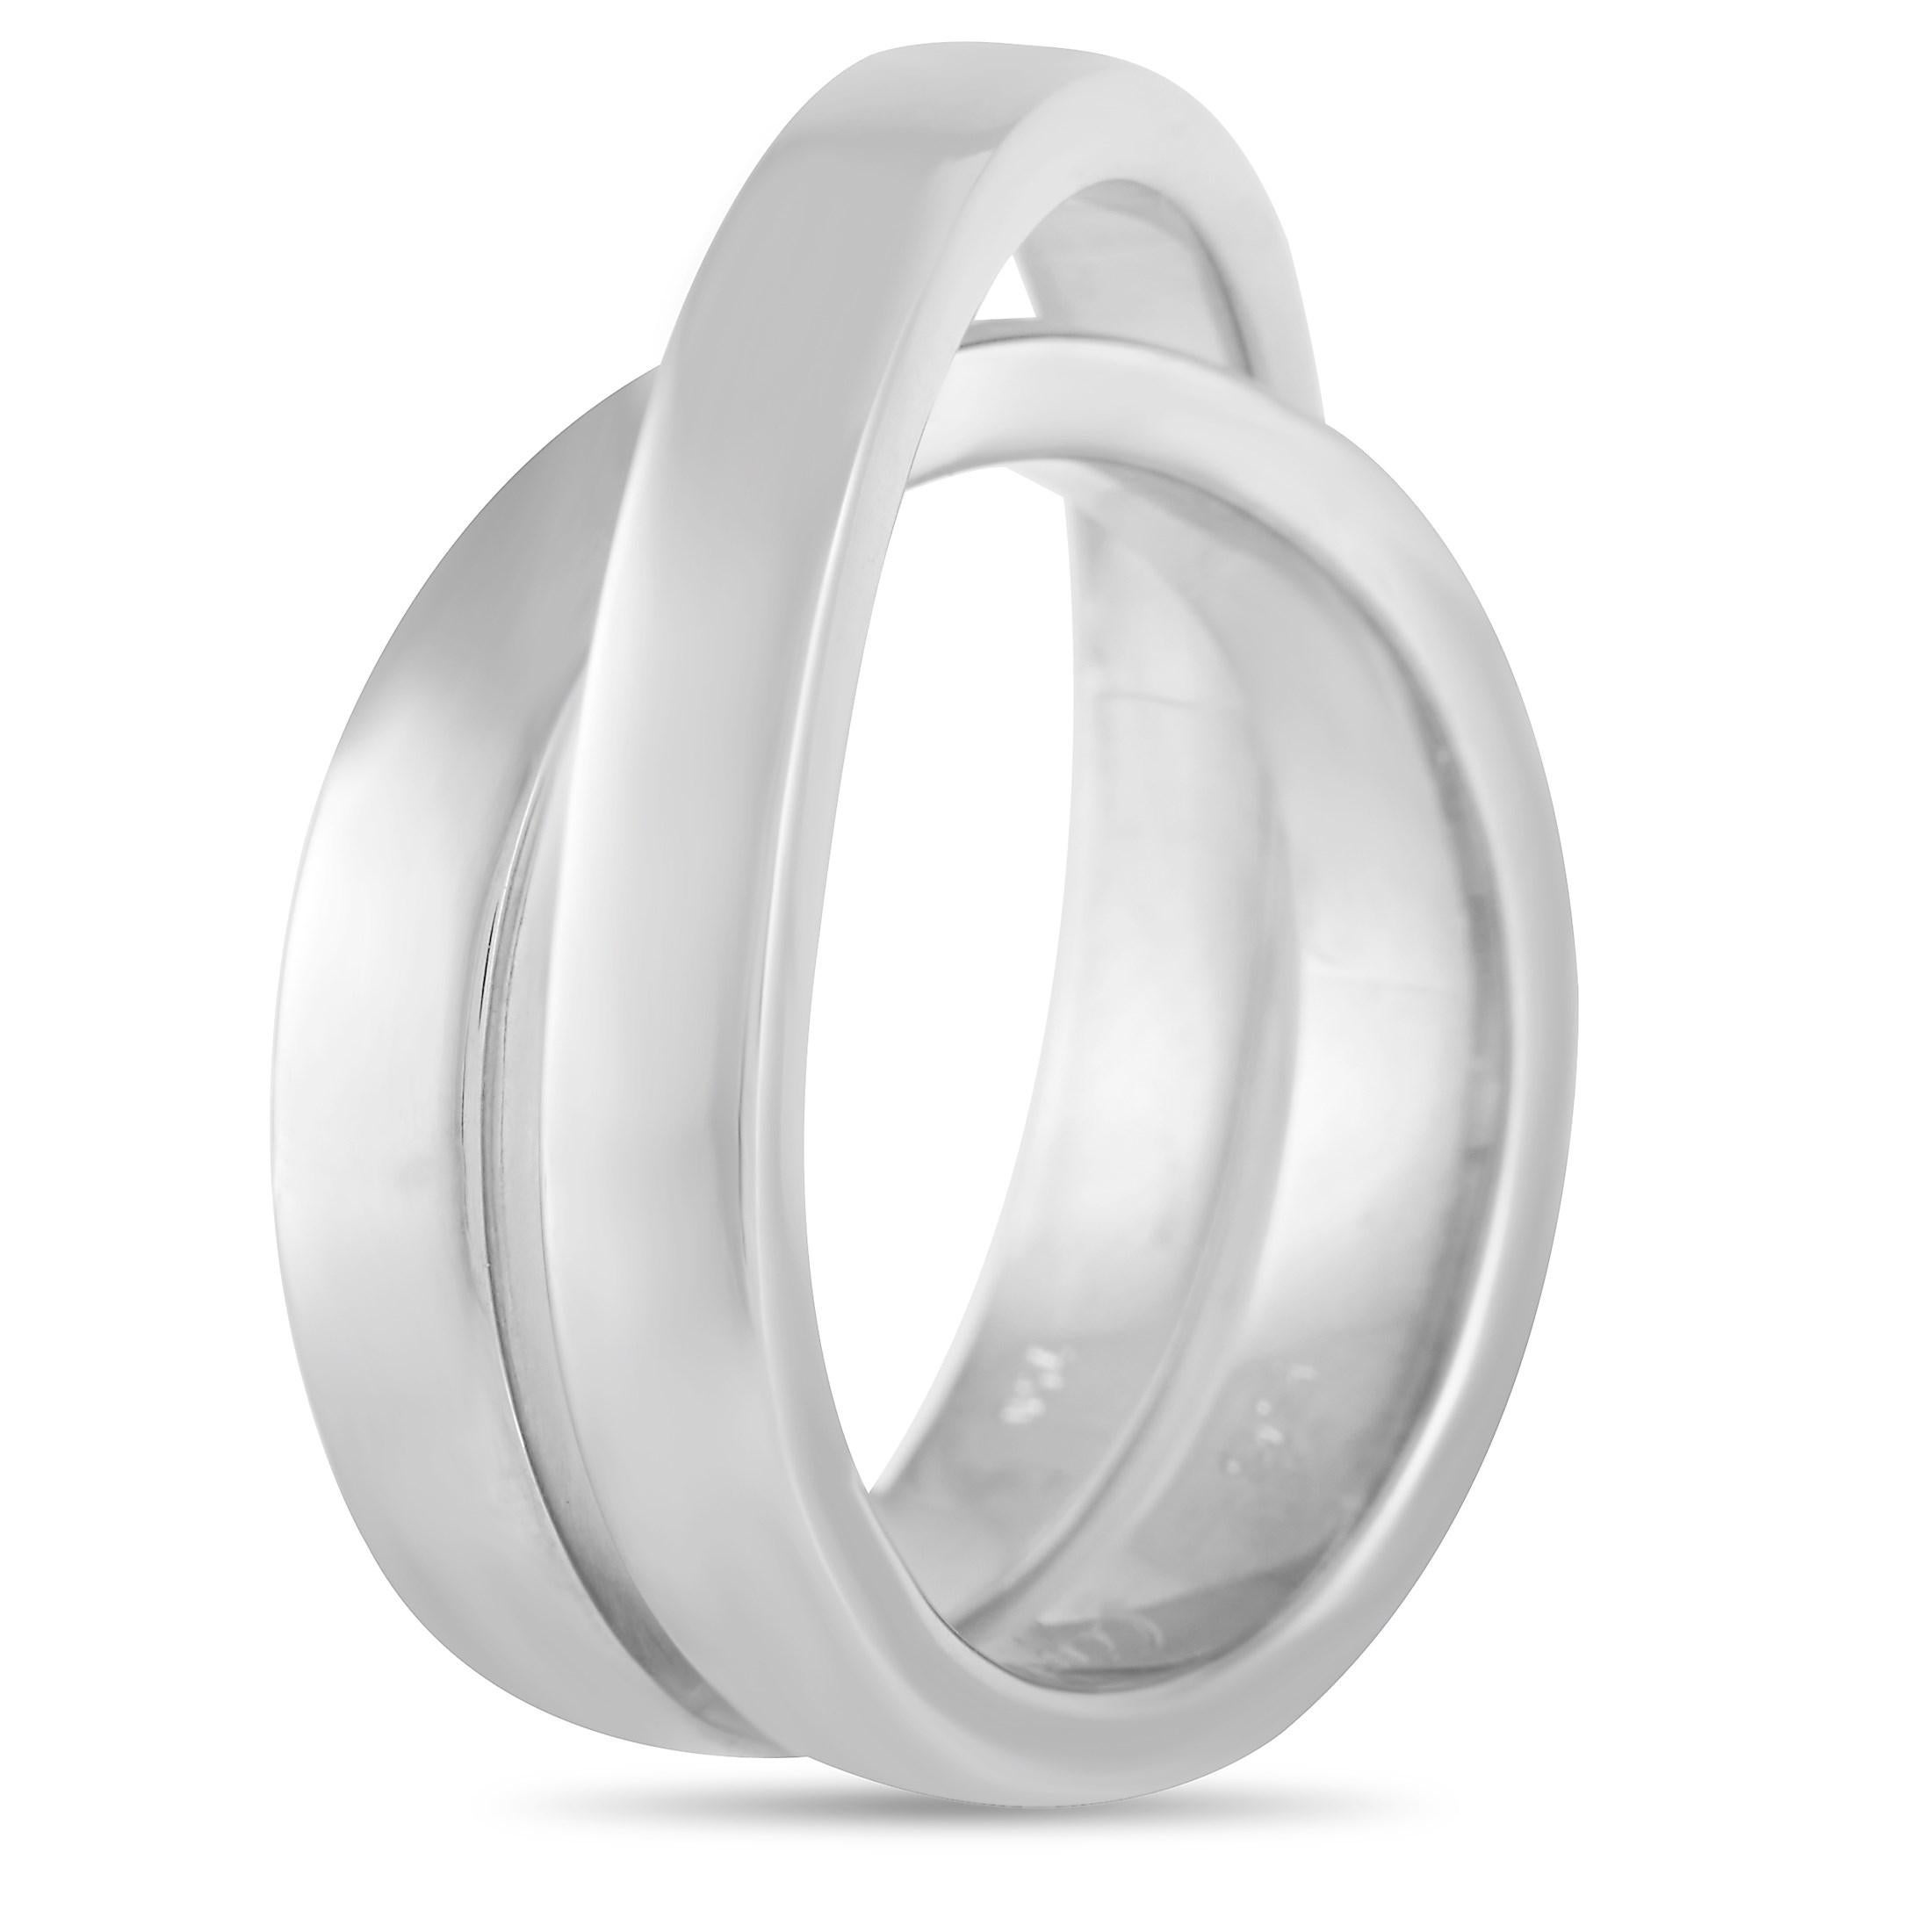 This Cartier 18K White Gold Nouvelle Bague Overlapping Band Ring is a modern alternative to the plain band style ring. The band is made with 18k white gold and intersects in the center of the ring. The ring has a band thickness of 9 mm, a top height